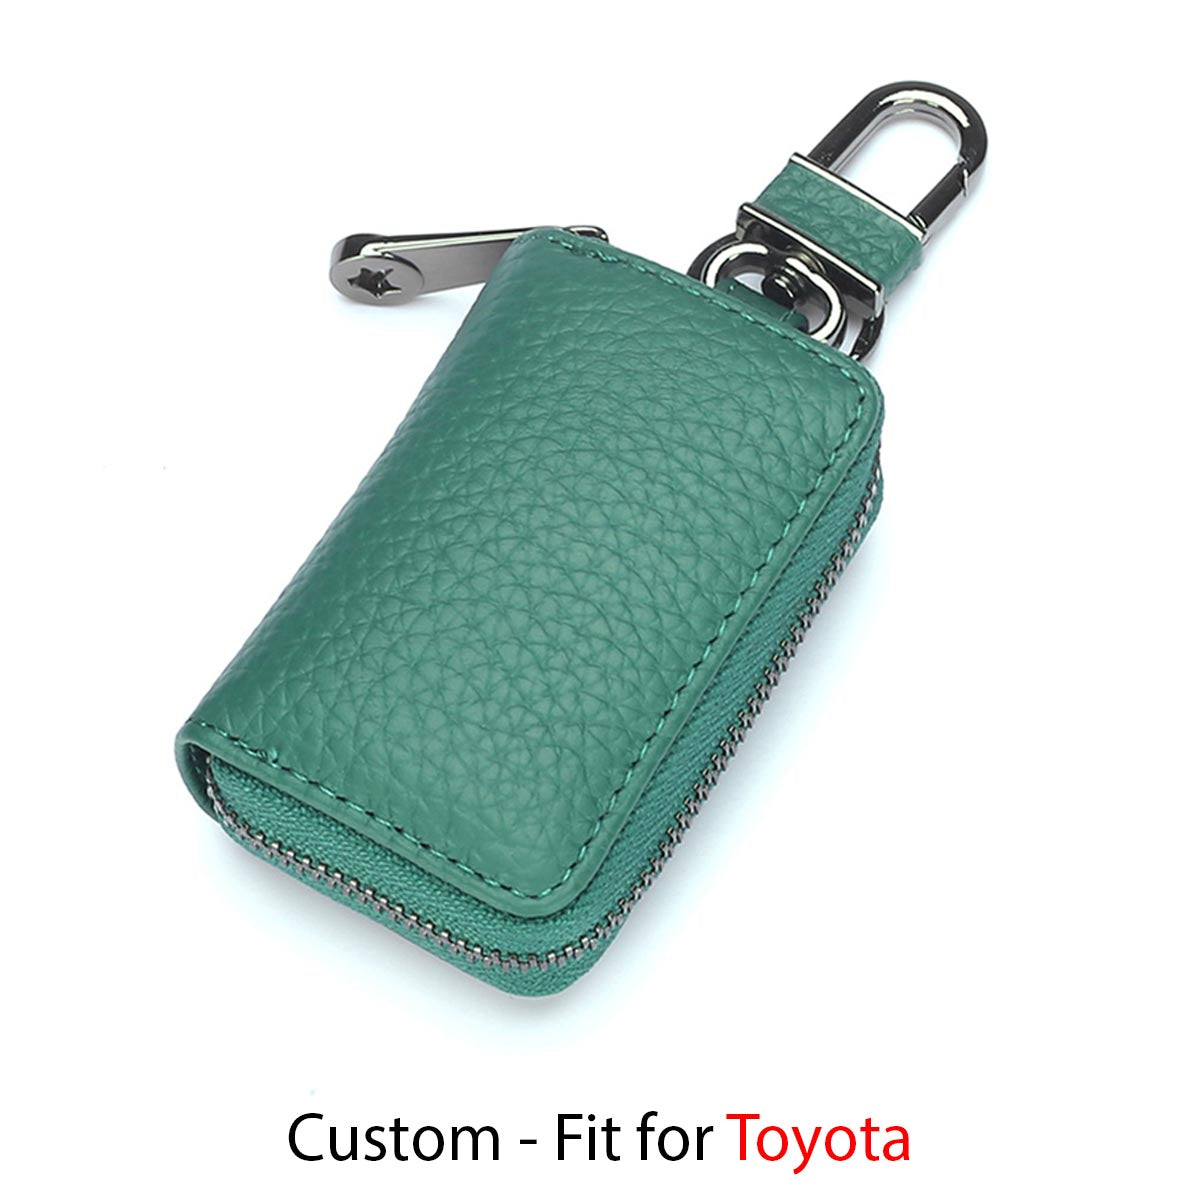 Car Key Cover, Custom For Your Cars, Genuine Leather Car Smart Key Chain Coin Holder Metal Hook and Keyring Wallet Zipper Bag, Car Accessories TY13989